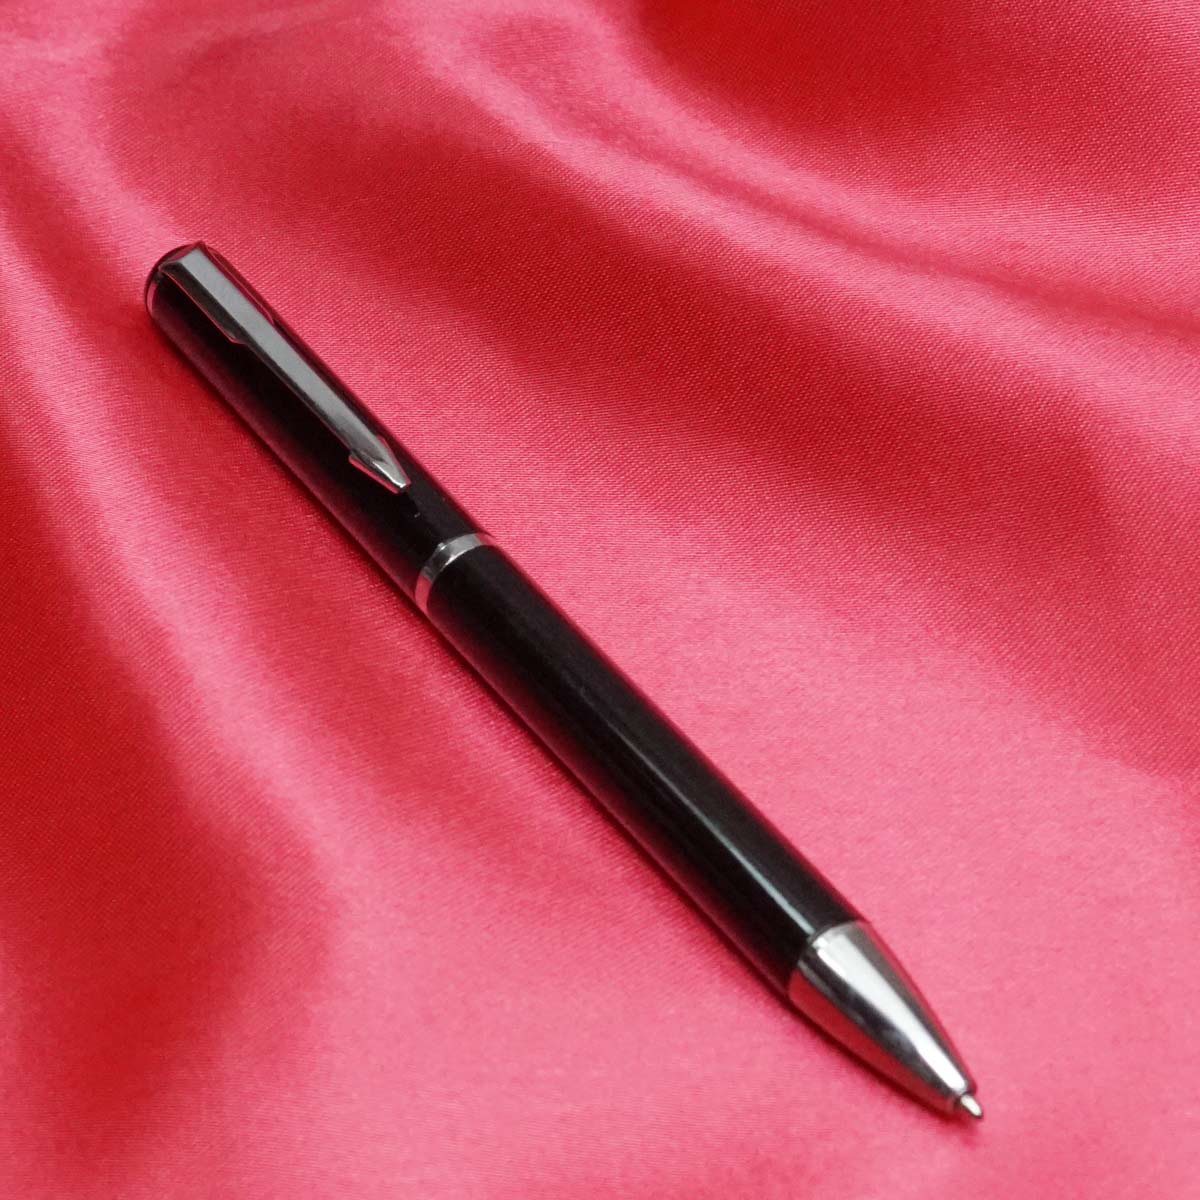 penhouse.in Glossy Black Color Body With Silver Trim Medium Tip Twist Type Ball Pen SKU 21475